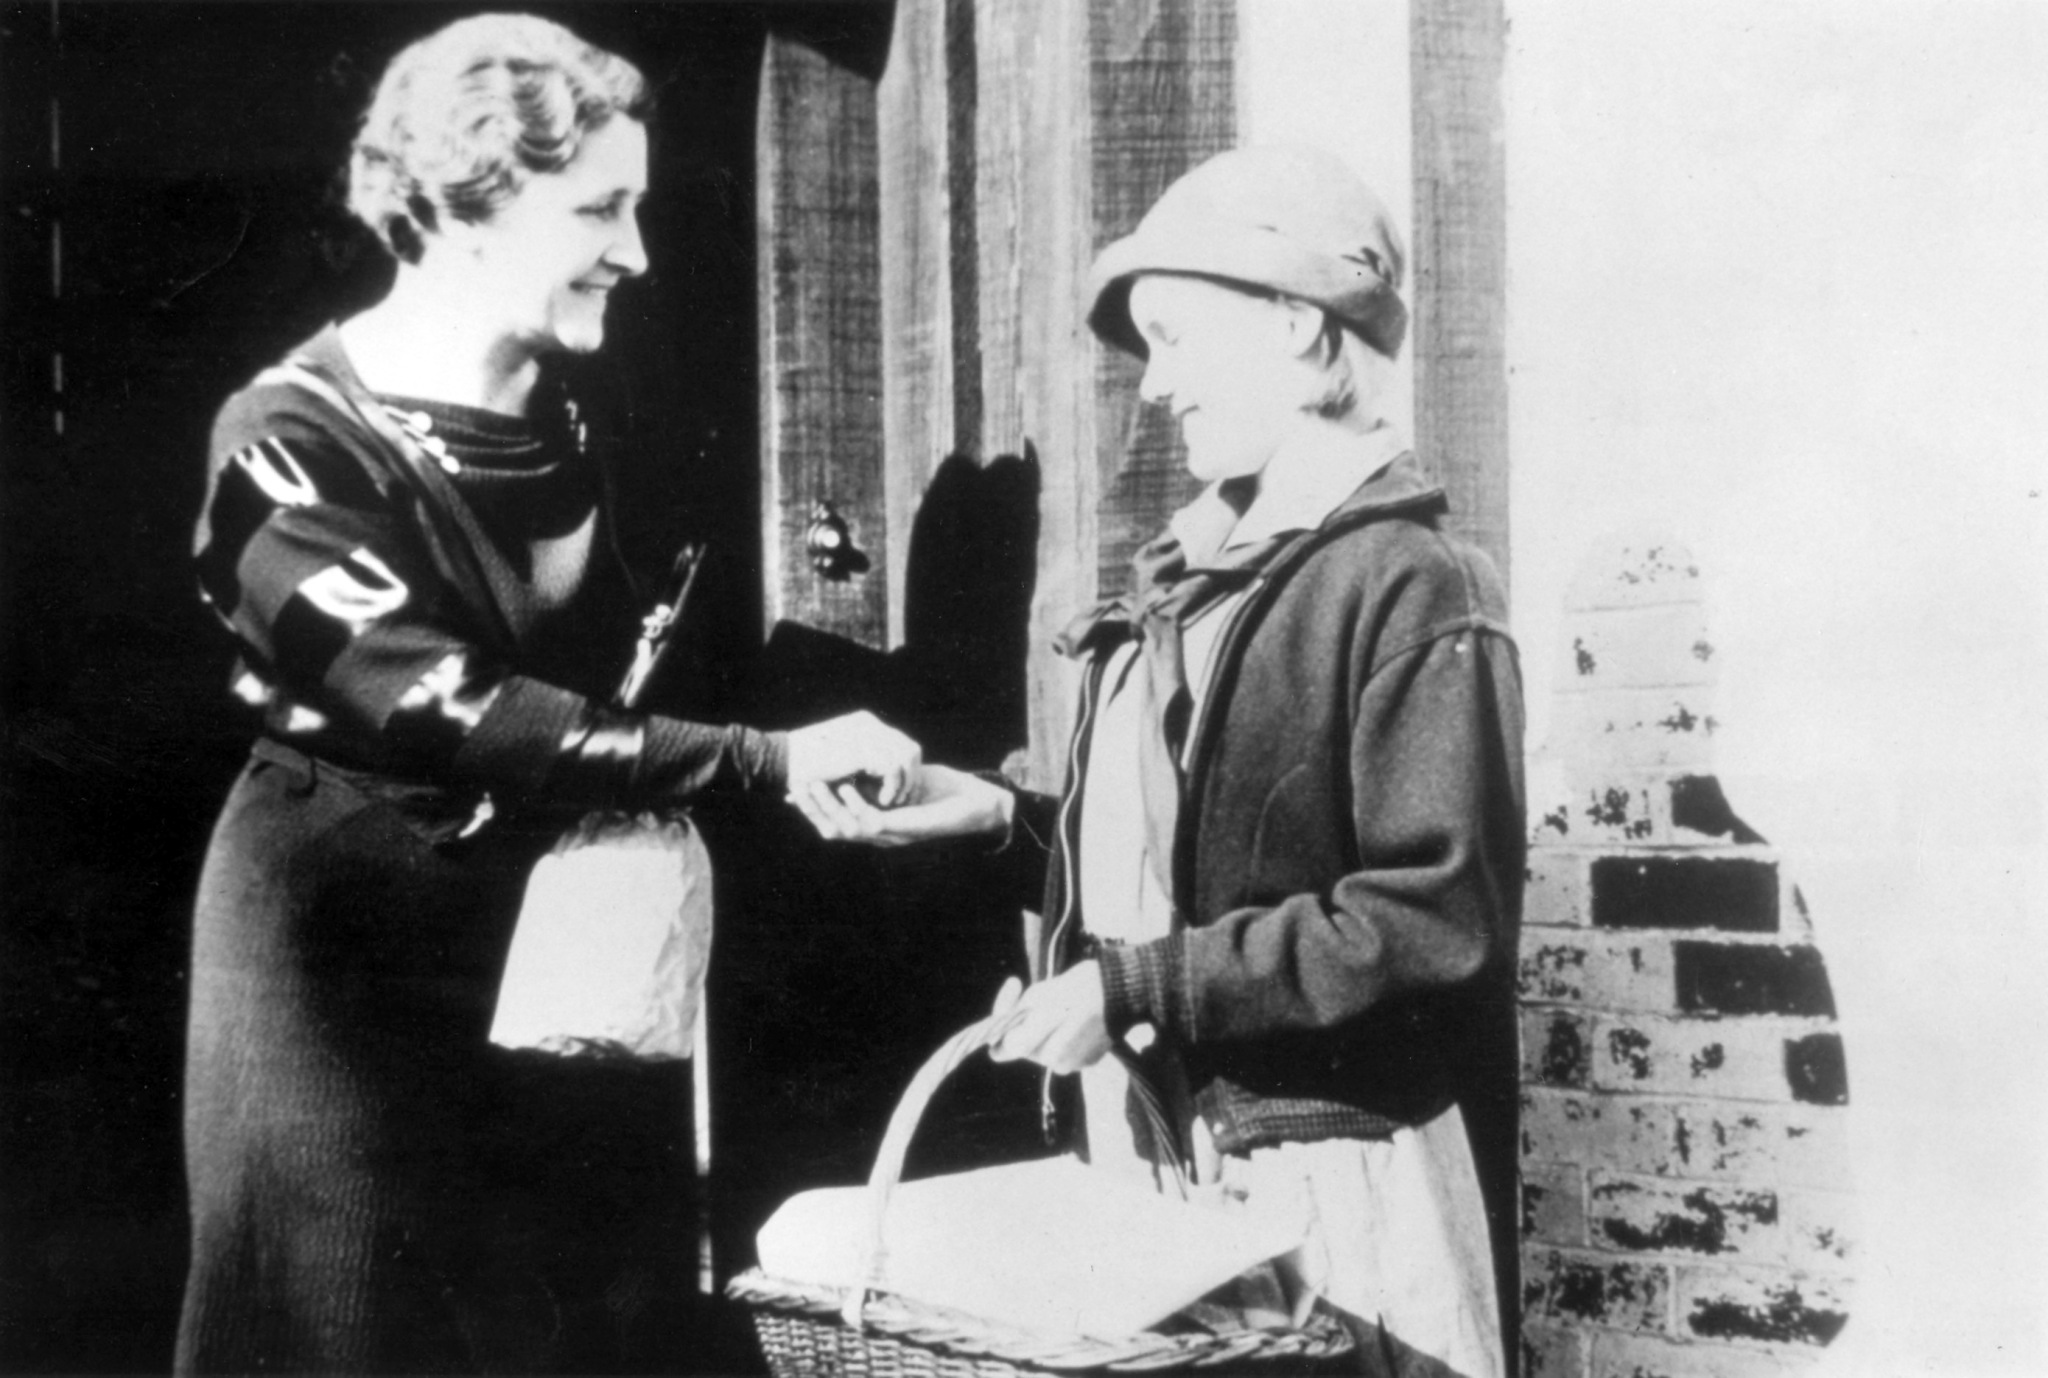 Girl Scouts selling cookies in 1928 (Girl Scouts of the USA)